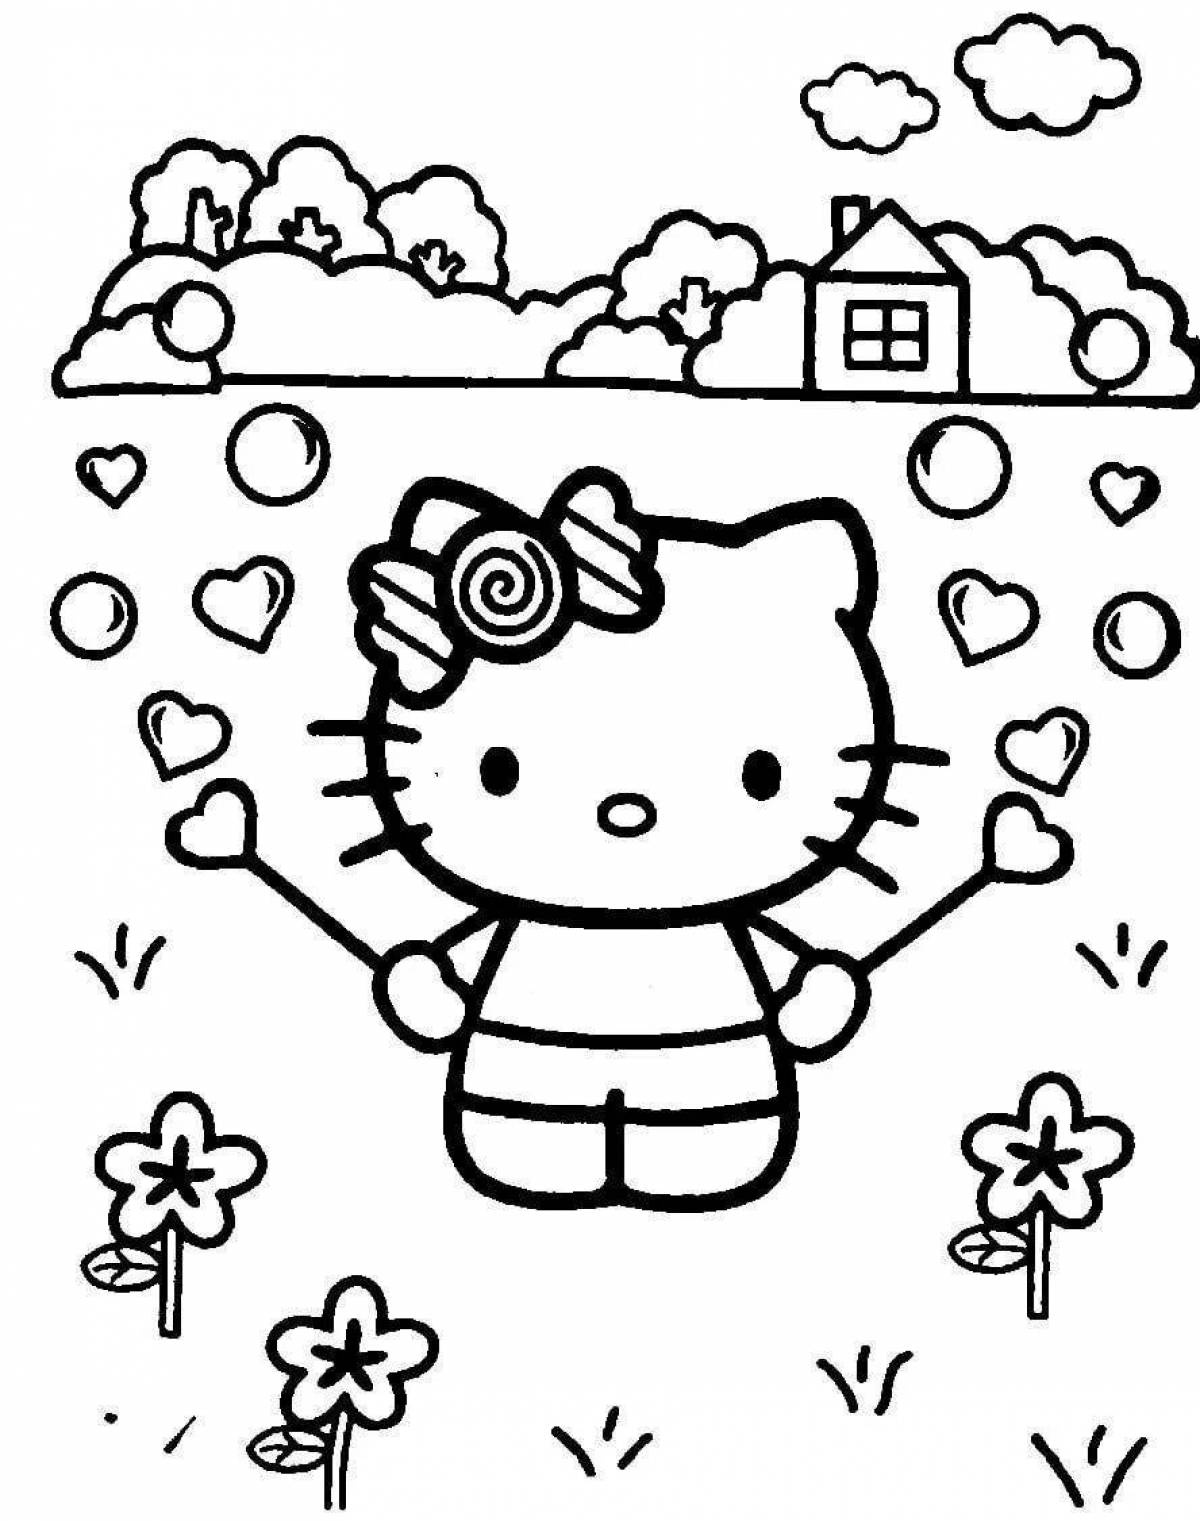 Charming aster kitty coloring book